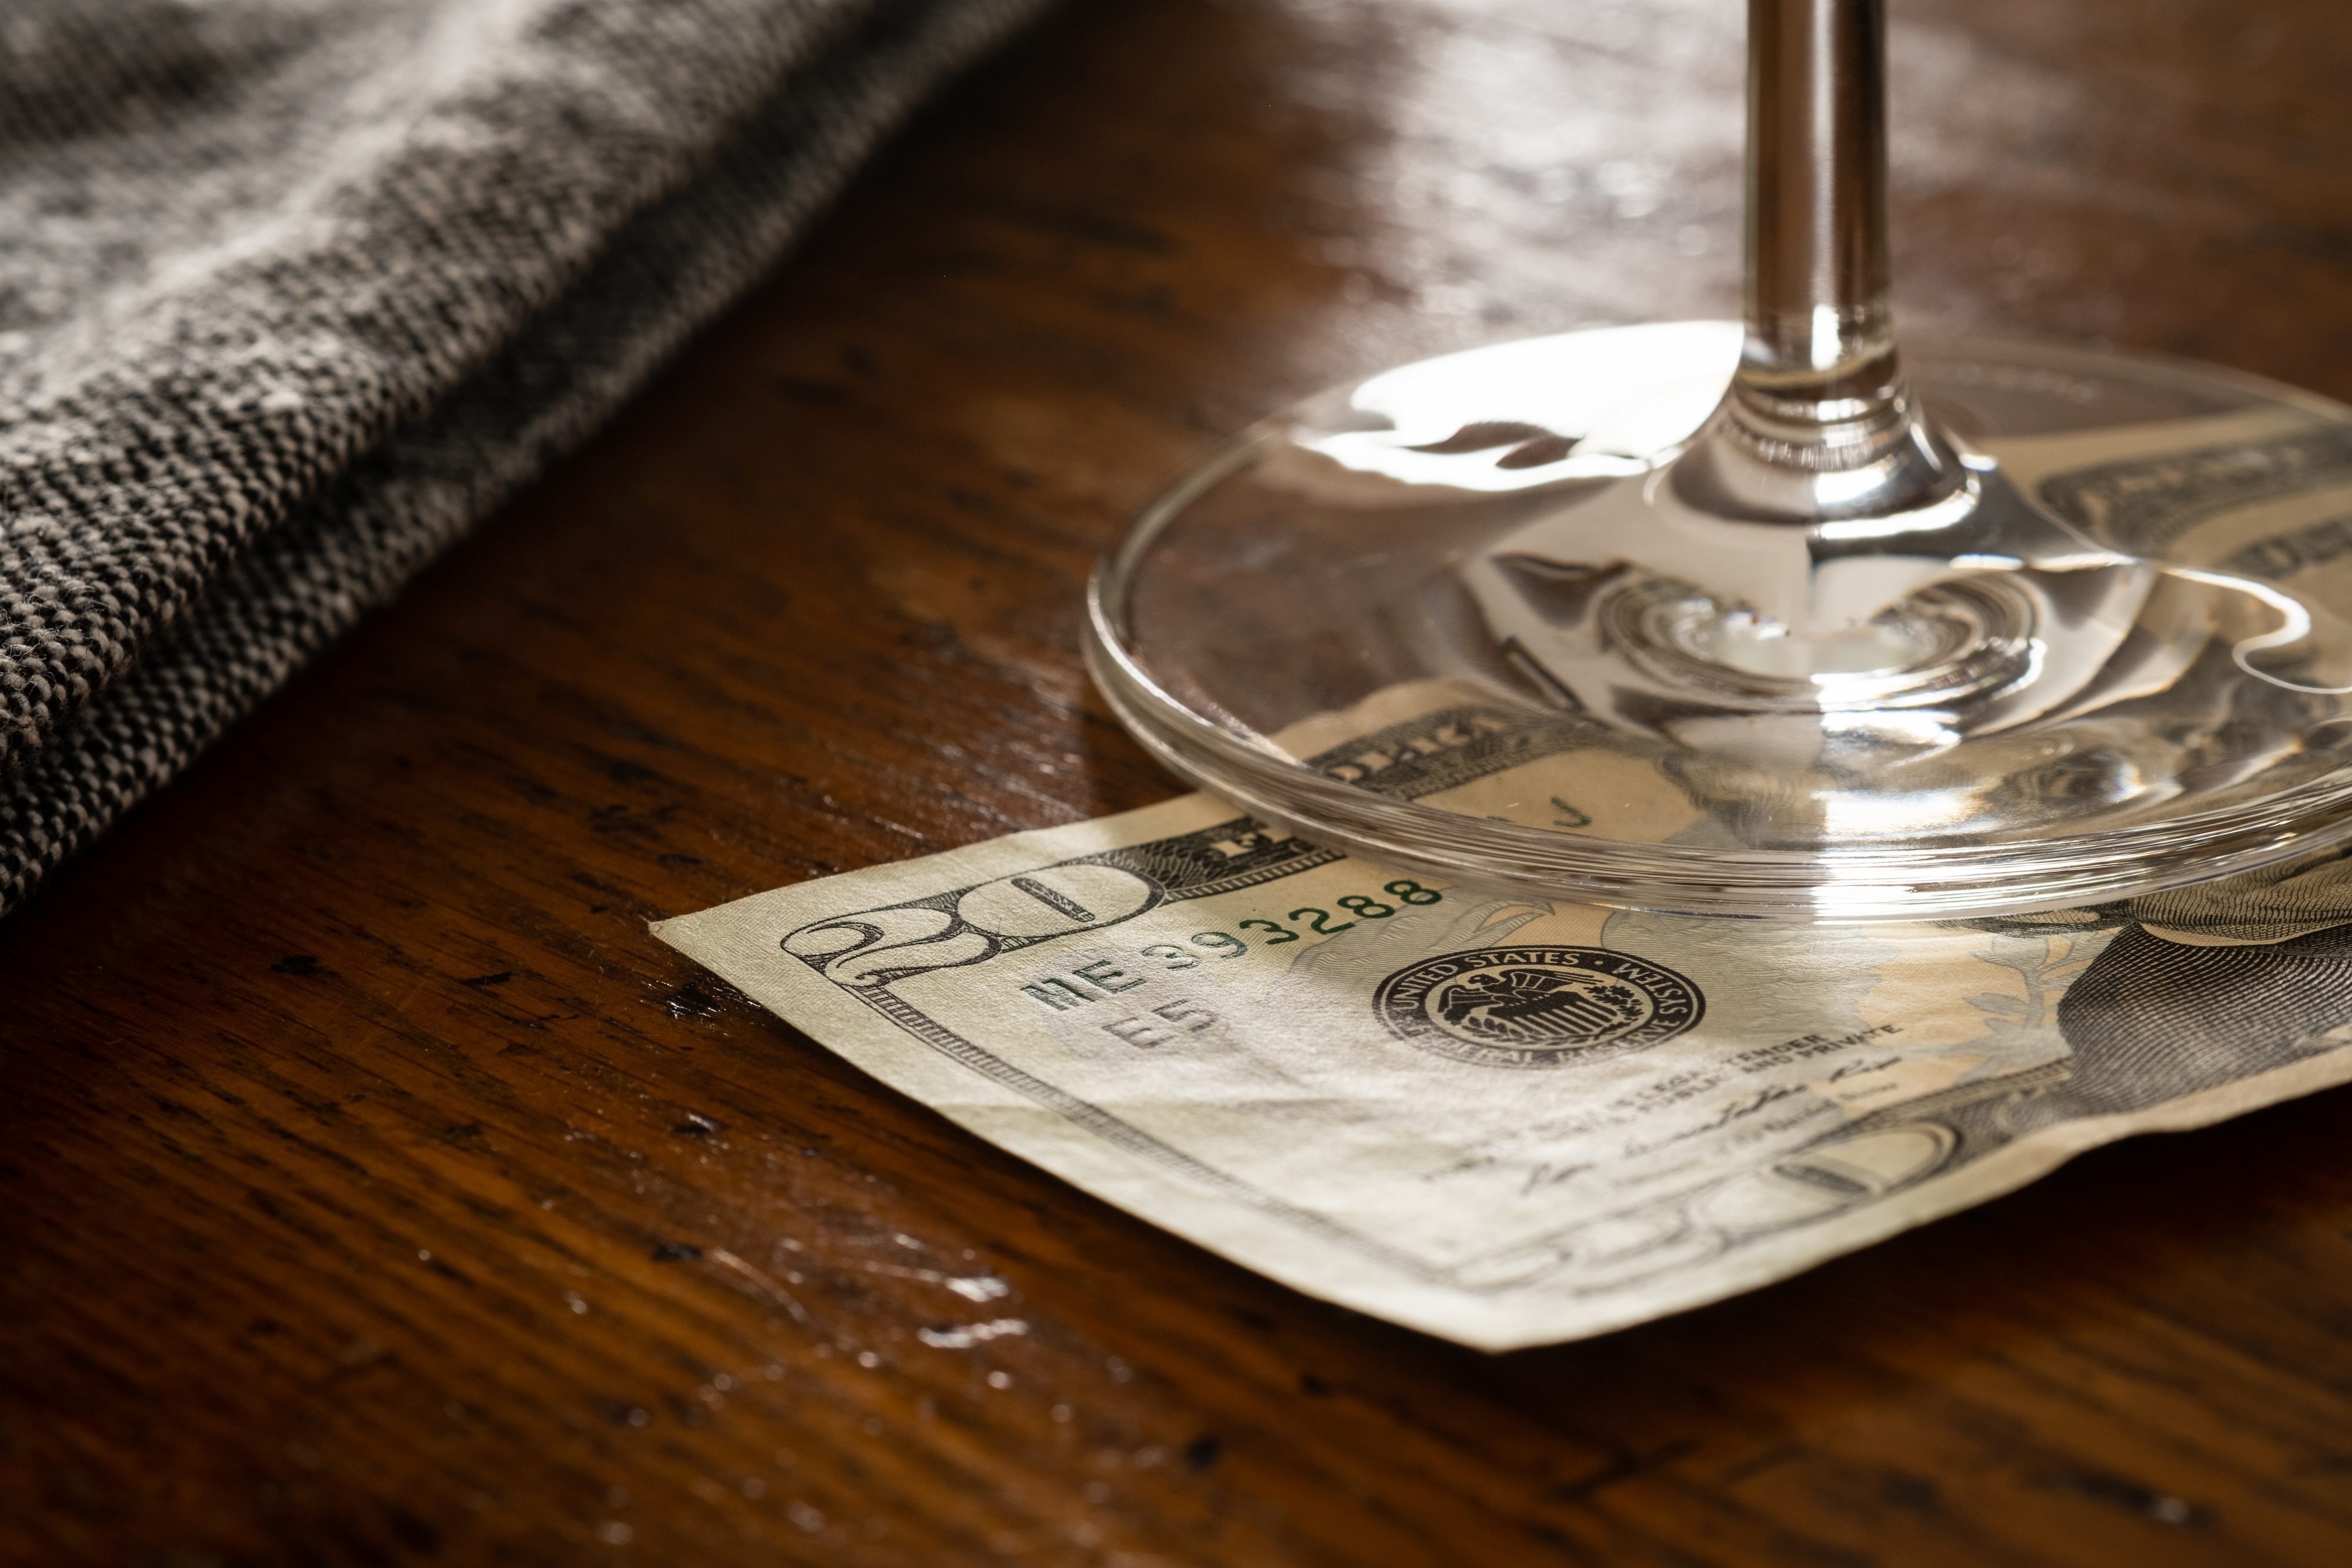 A $20 bill placed under a wine glass